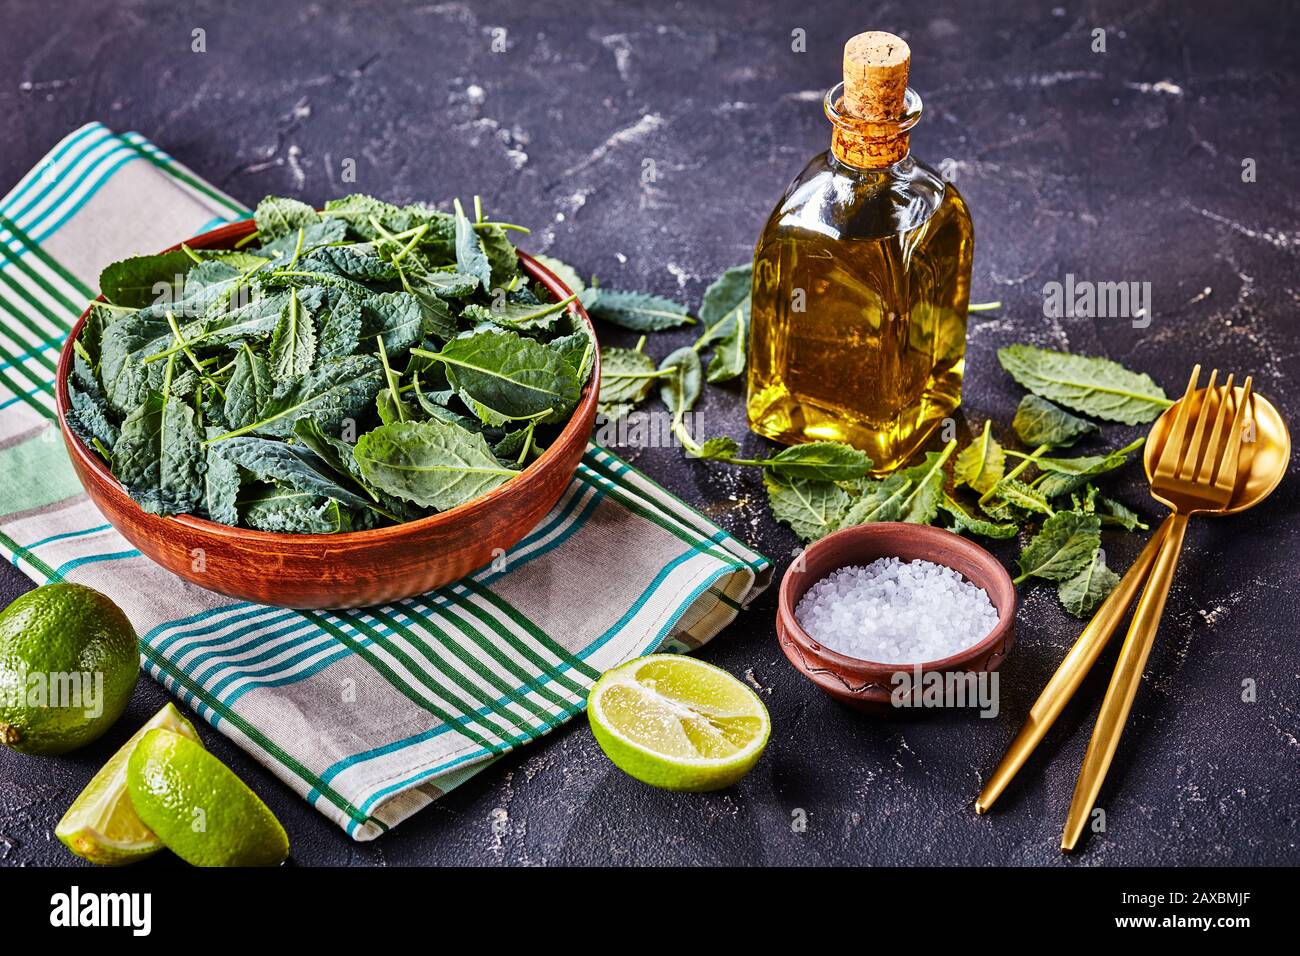 Healthy eating lifestyle: fresh kale leaves on a bowl, served with sea salt and olive oil, salad utensils and lime on dark concrete background, horizo Stock Photo